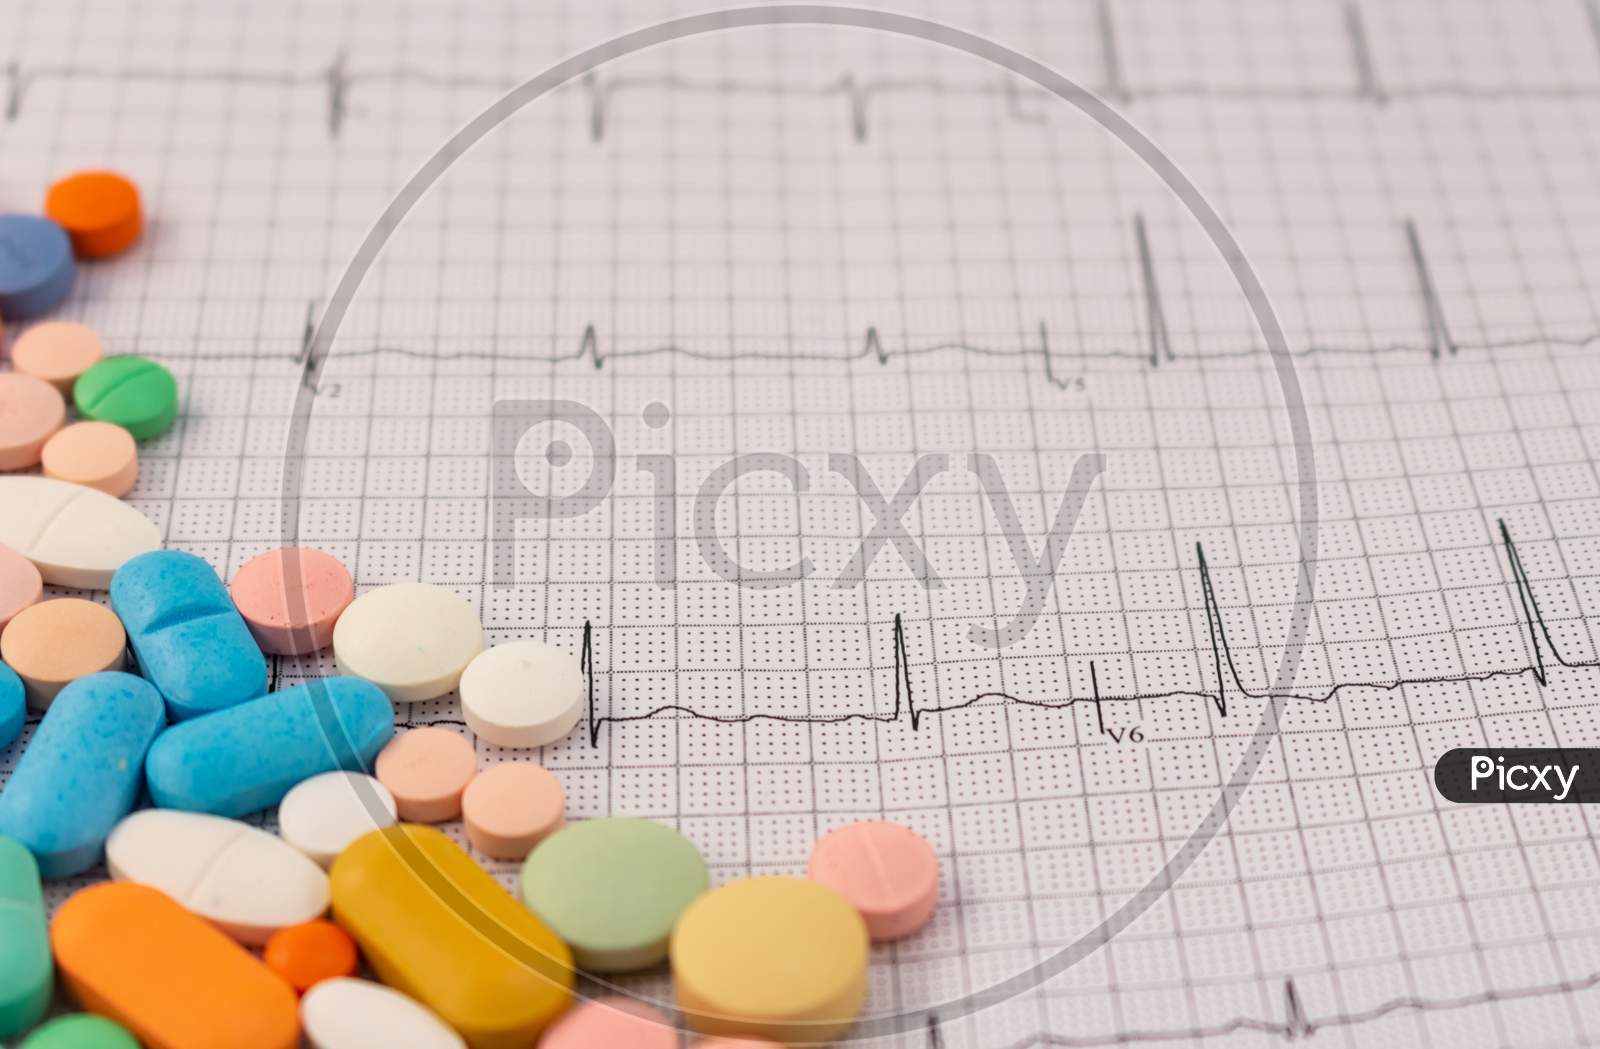 Pills Of Different Sizes And Colors On An Electrocardiogram Sheet.